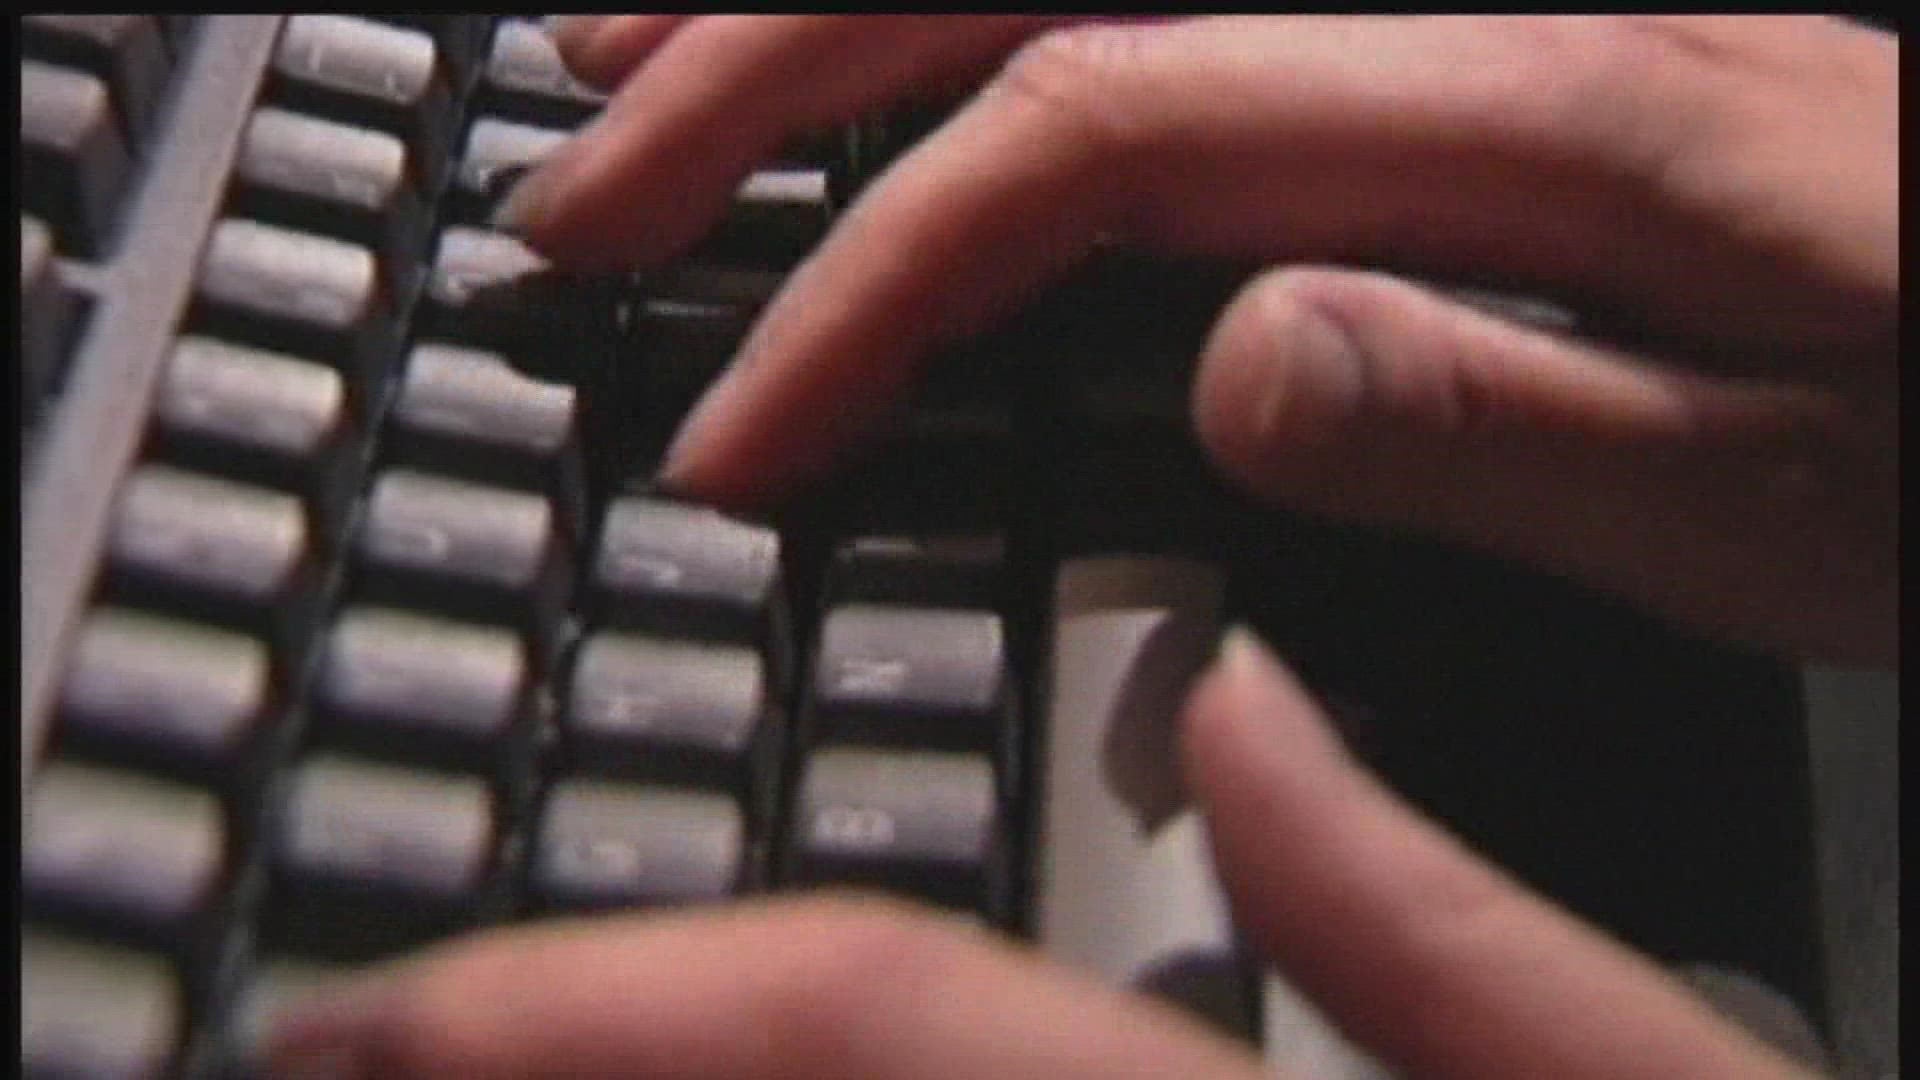 New data from the FBI and Federal Trade Commission shows Minnesotans lost $84 million in 2021 to online scams.